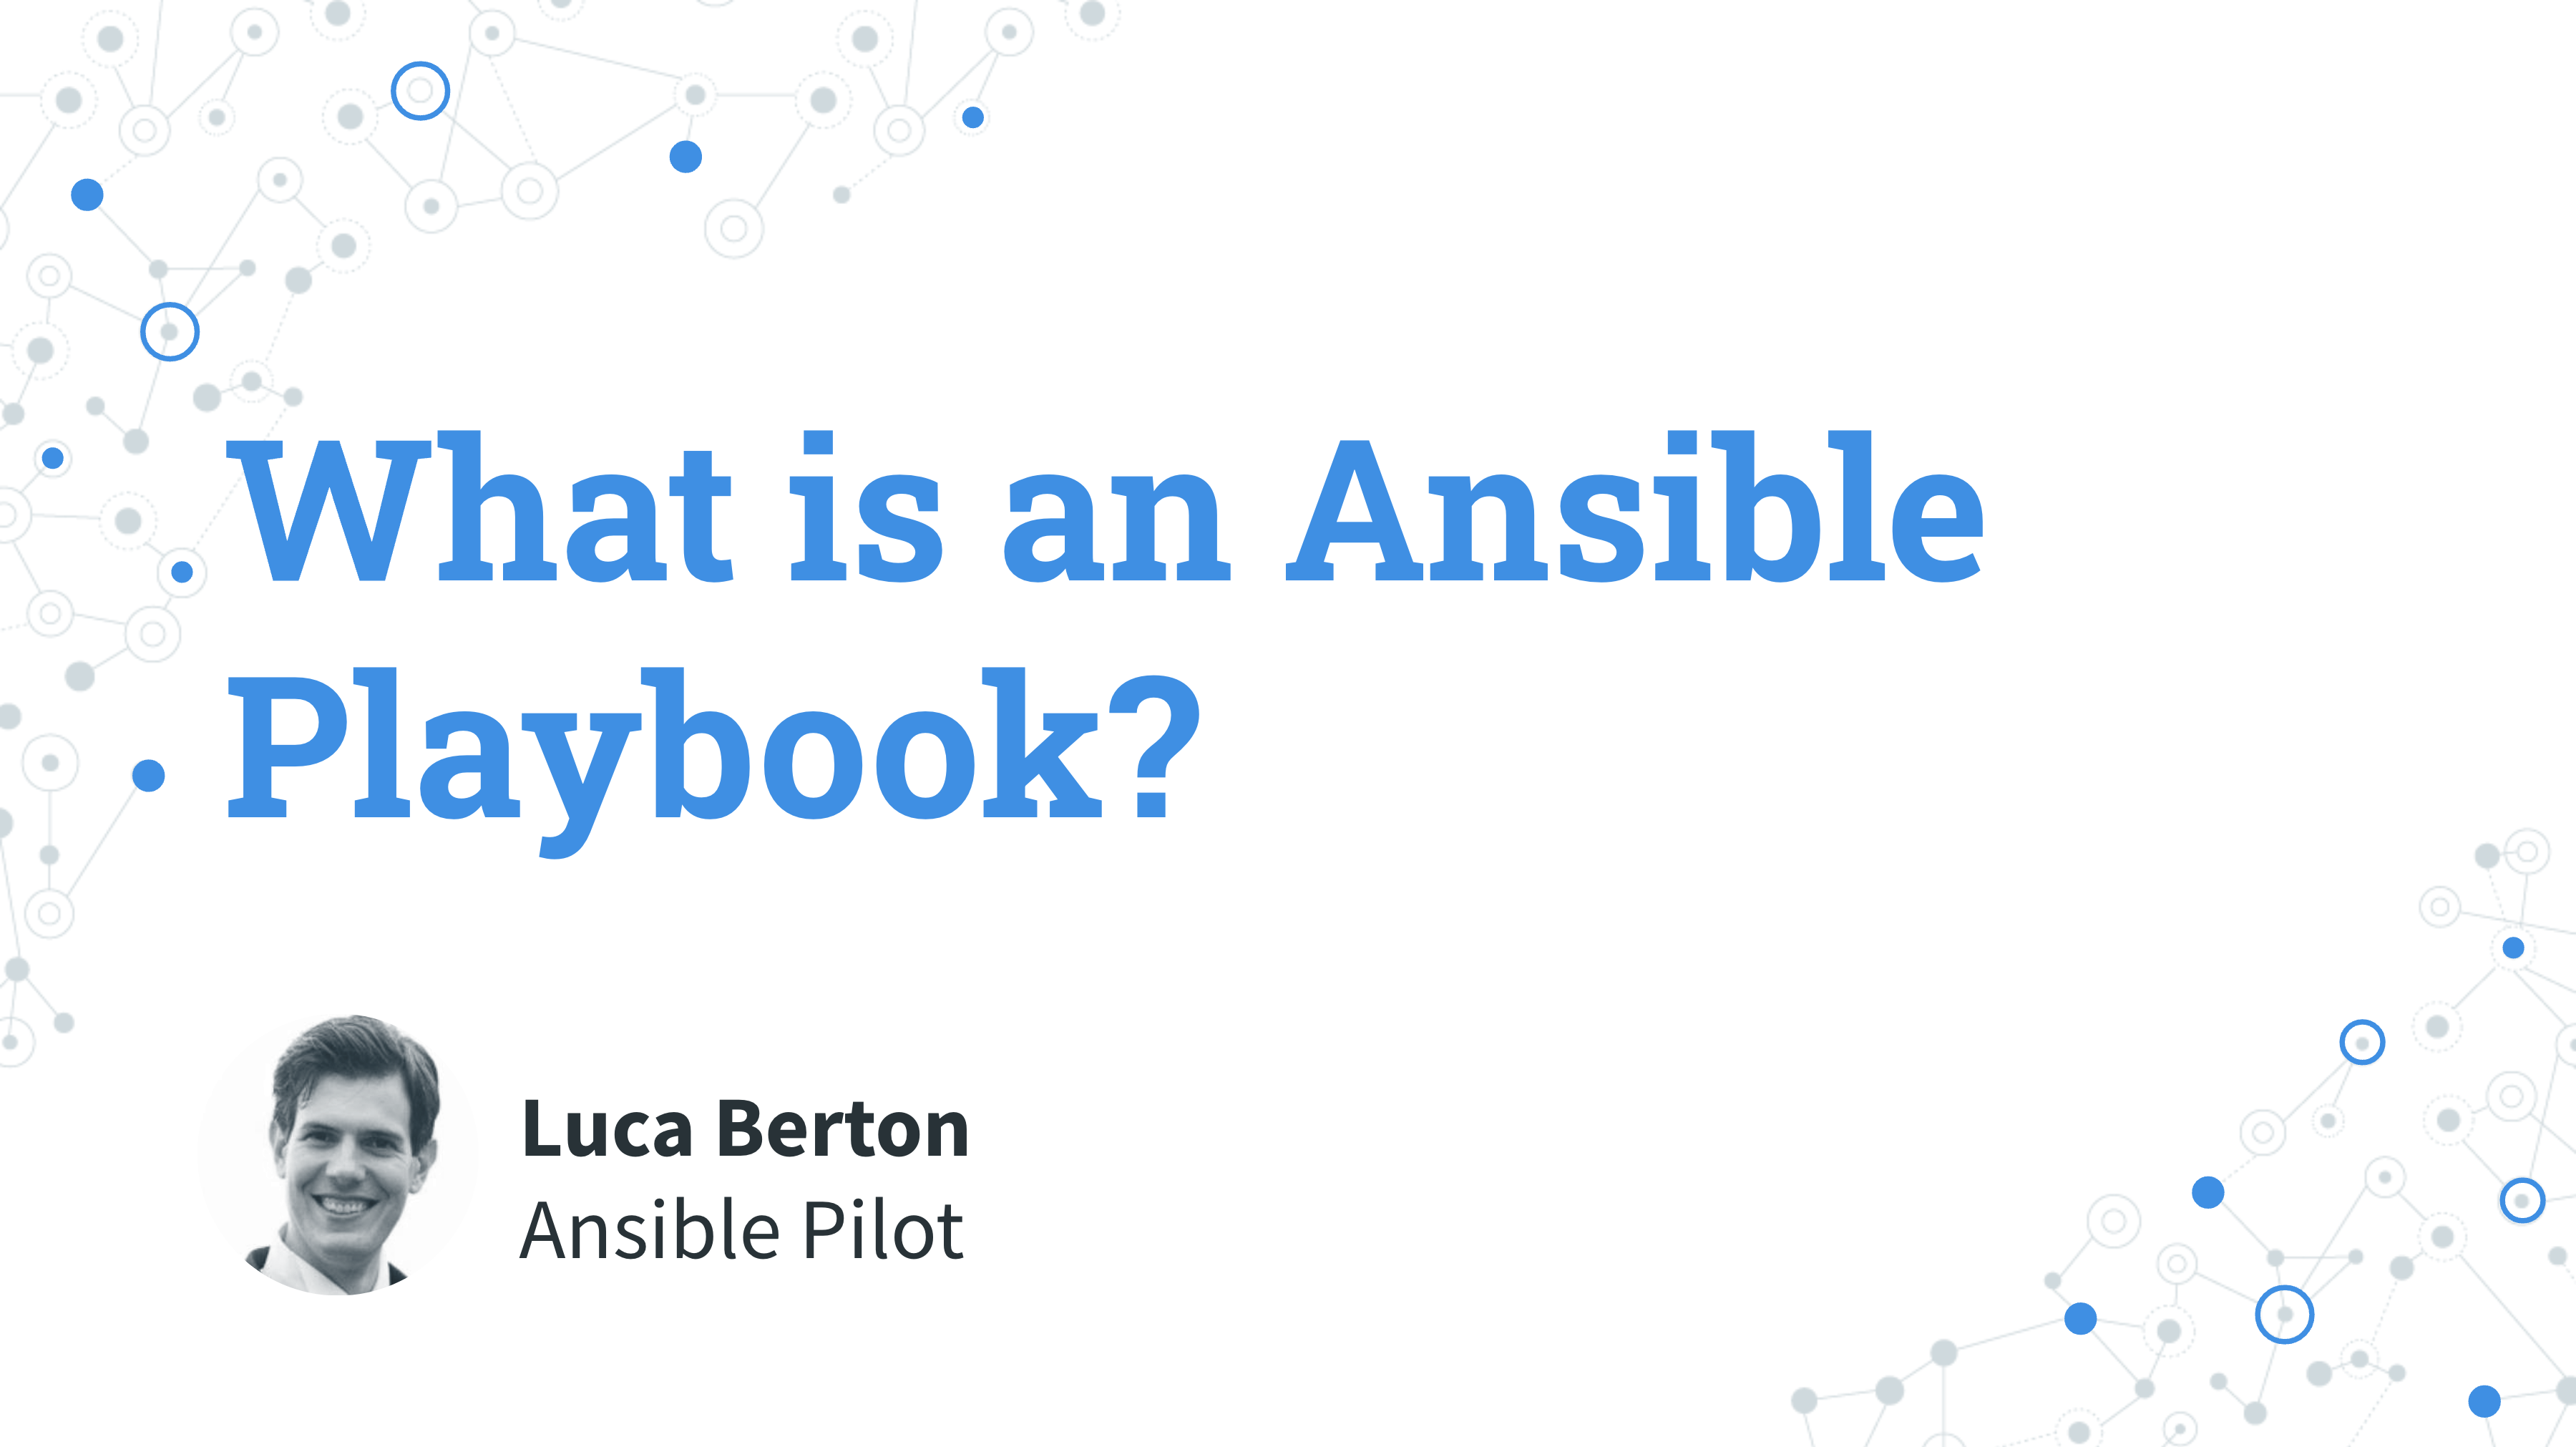 Ansible terminology - What is an Ansible Playbook?